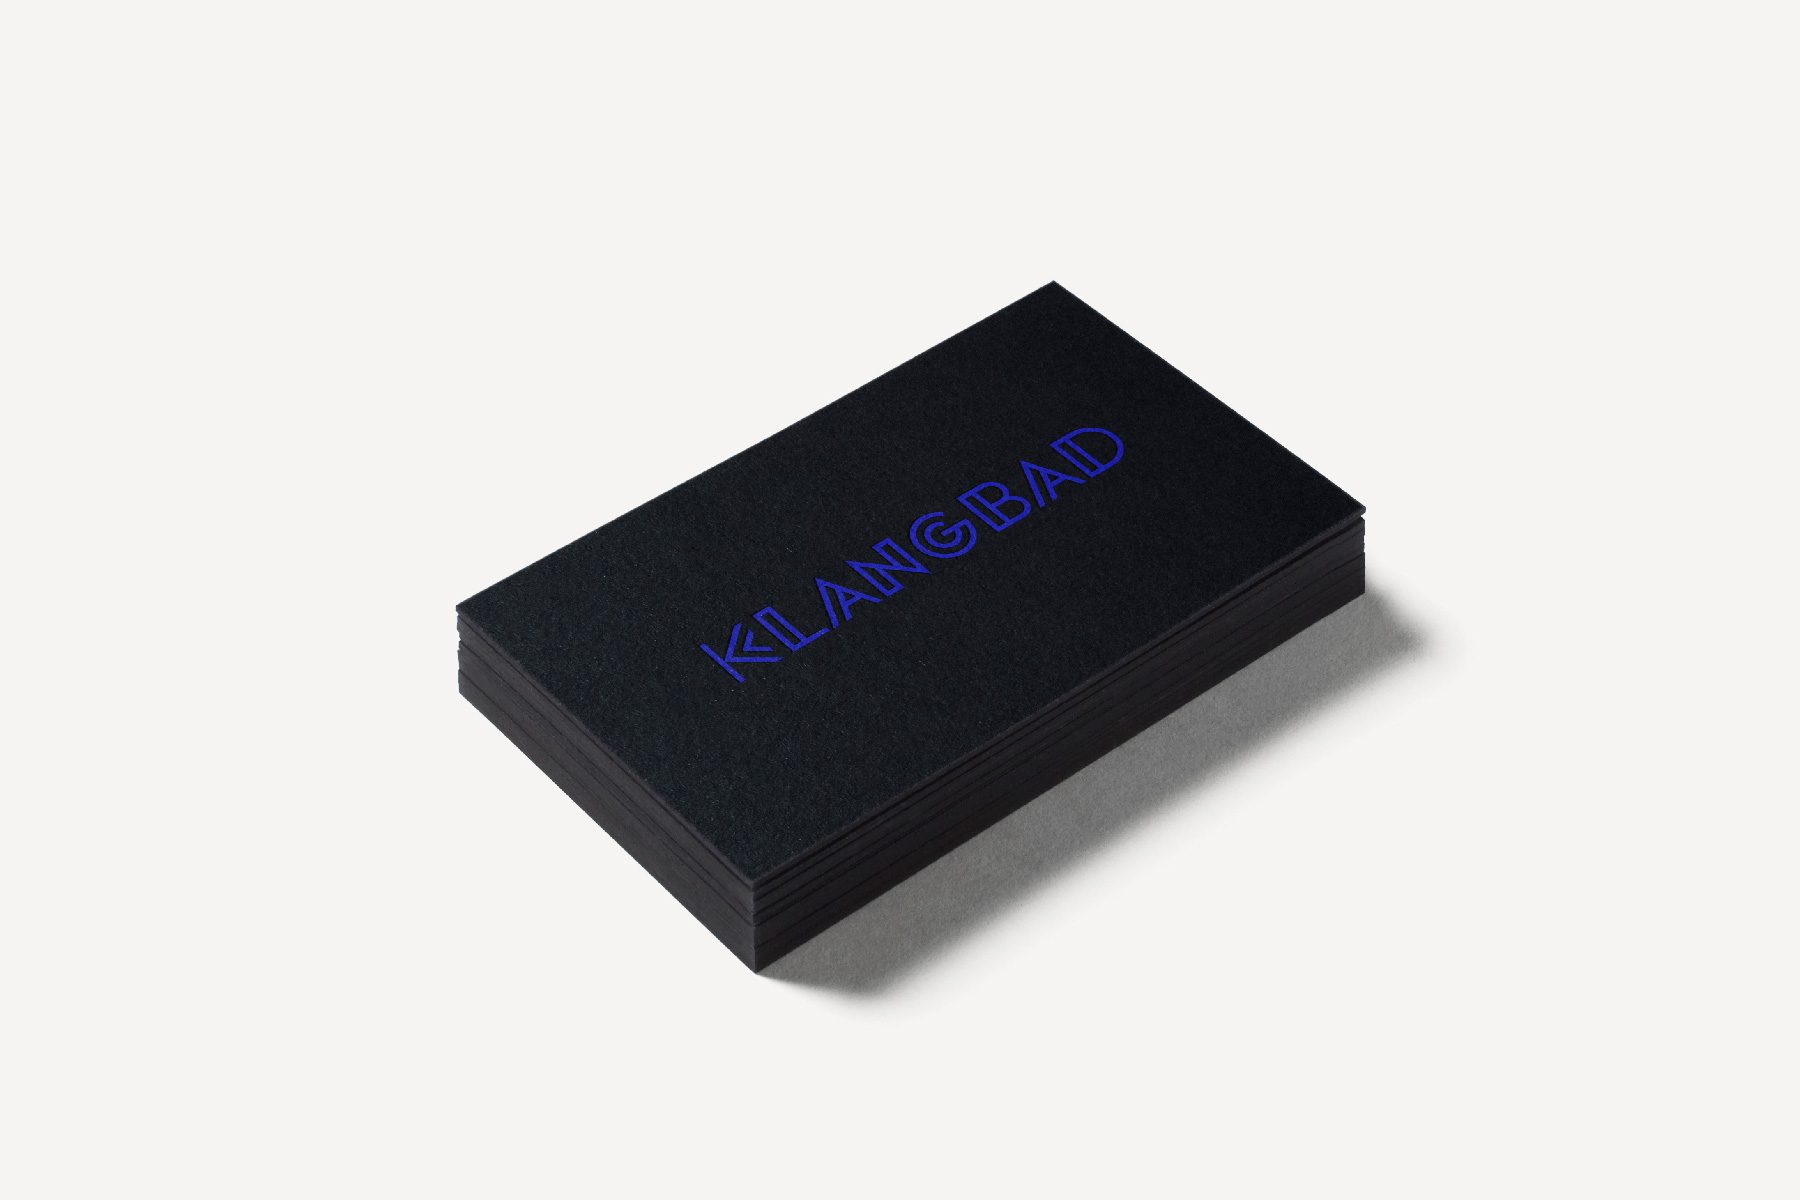 Klangbad Records – branding, cover art and communications
